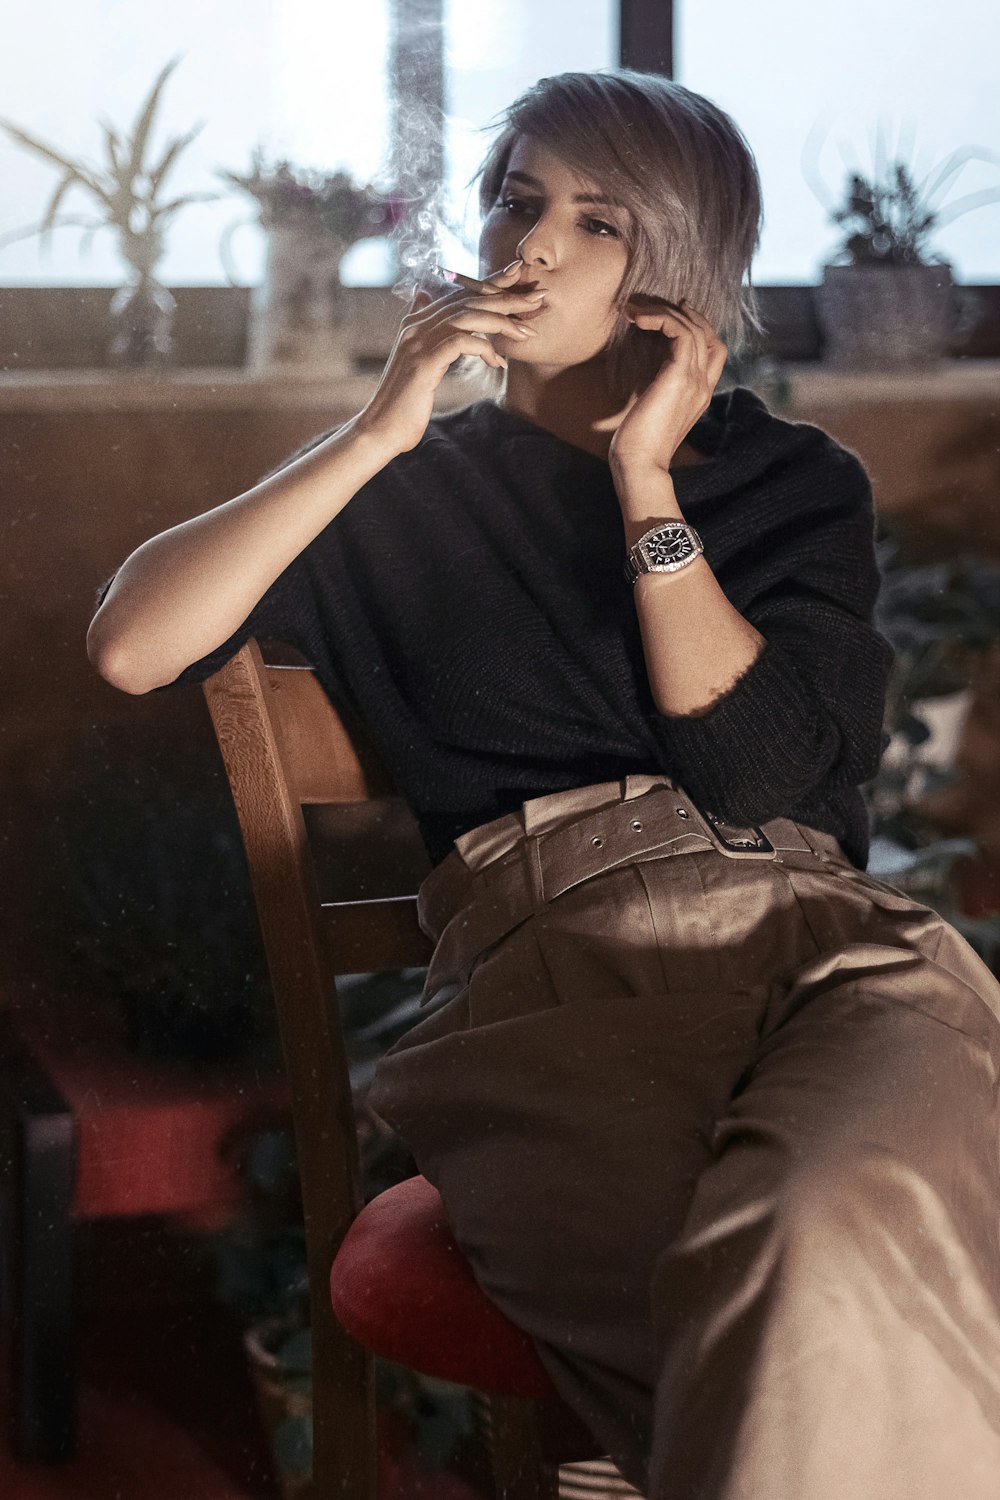 woman in black sleeveless shirt and brown pants sitting on brown wooden chair